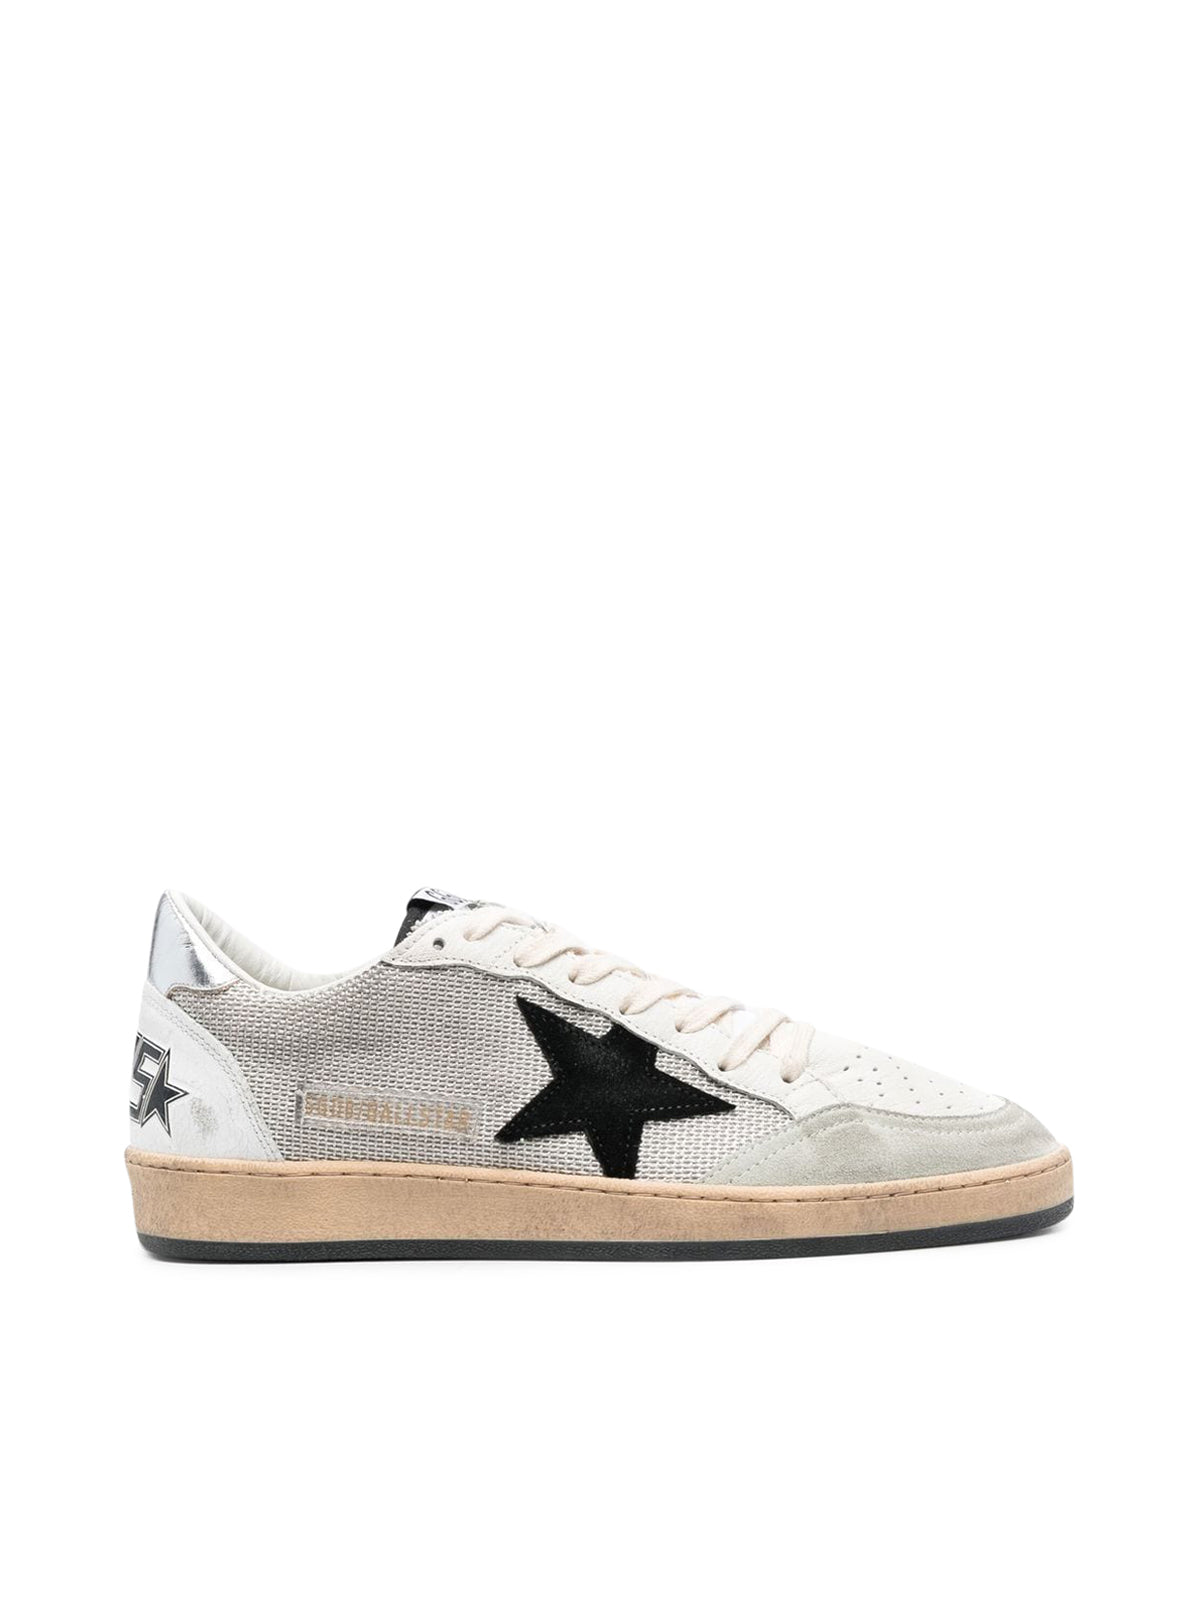 Ball-Star low-top sneakers